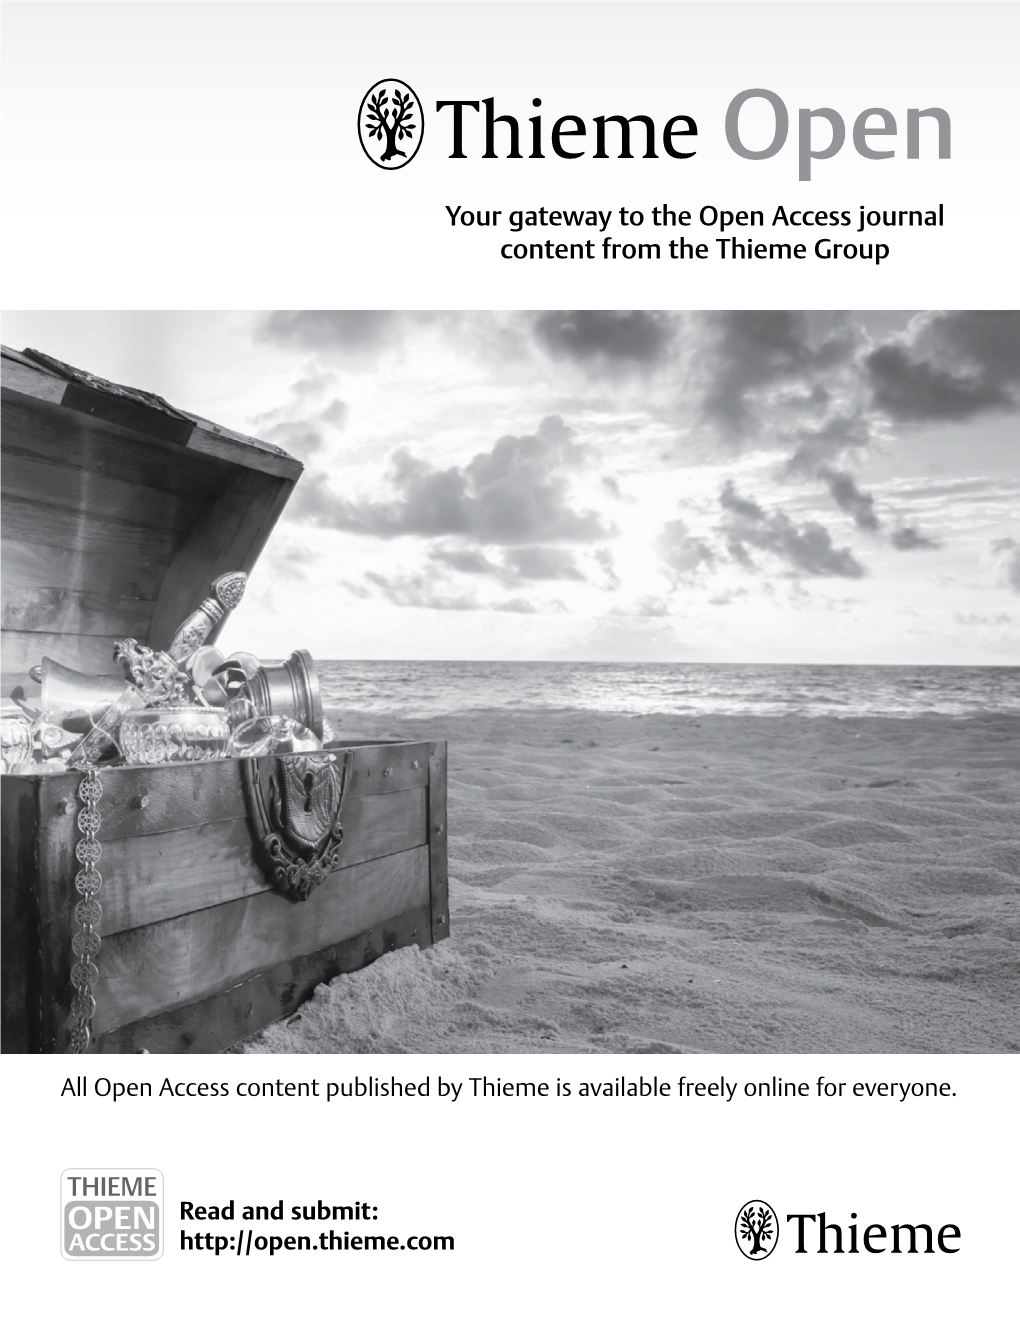 Your Gateway to the Open Access Journal Content from the Thieme Group